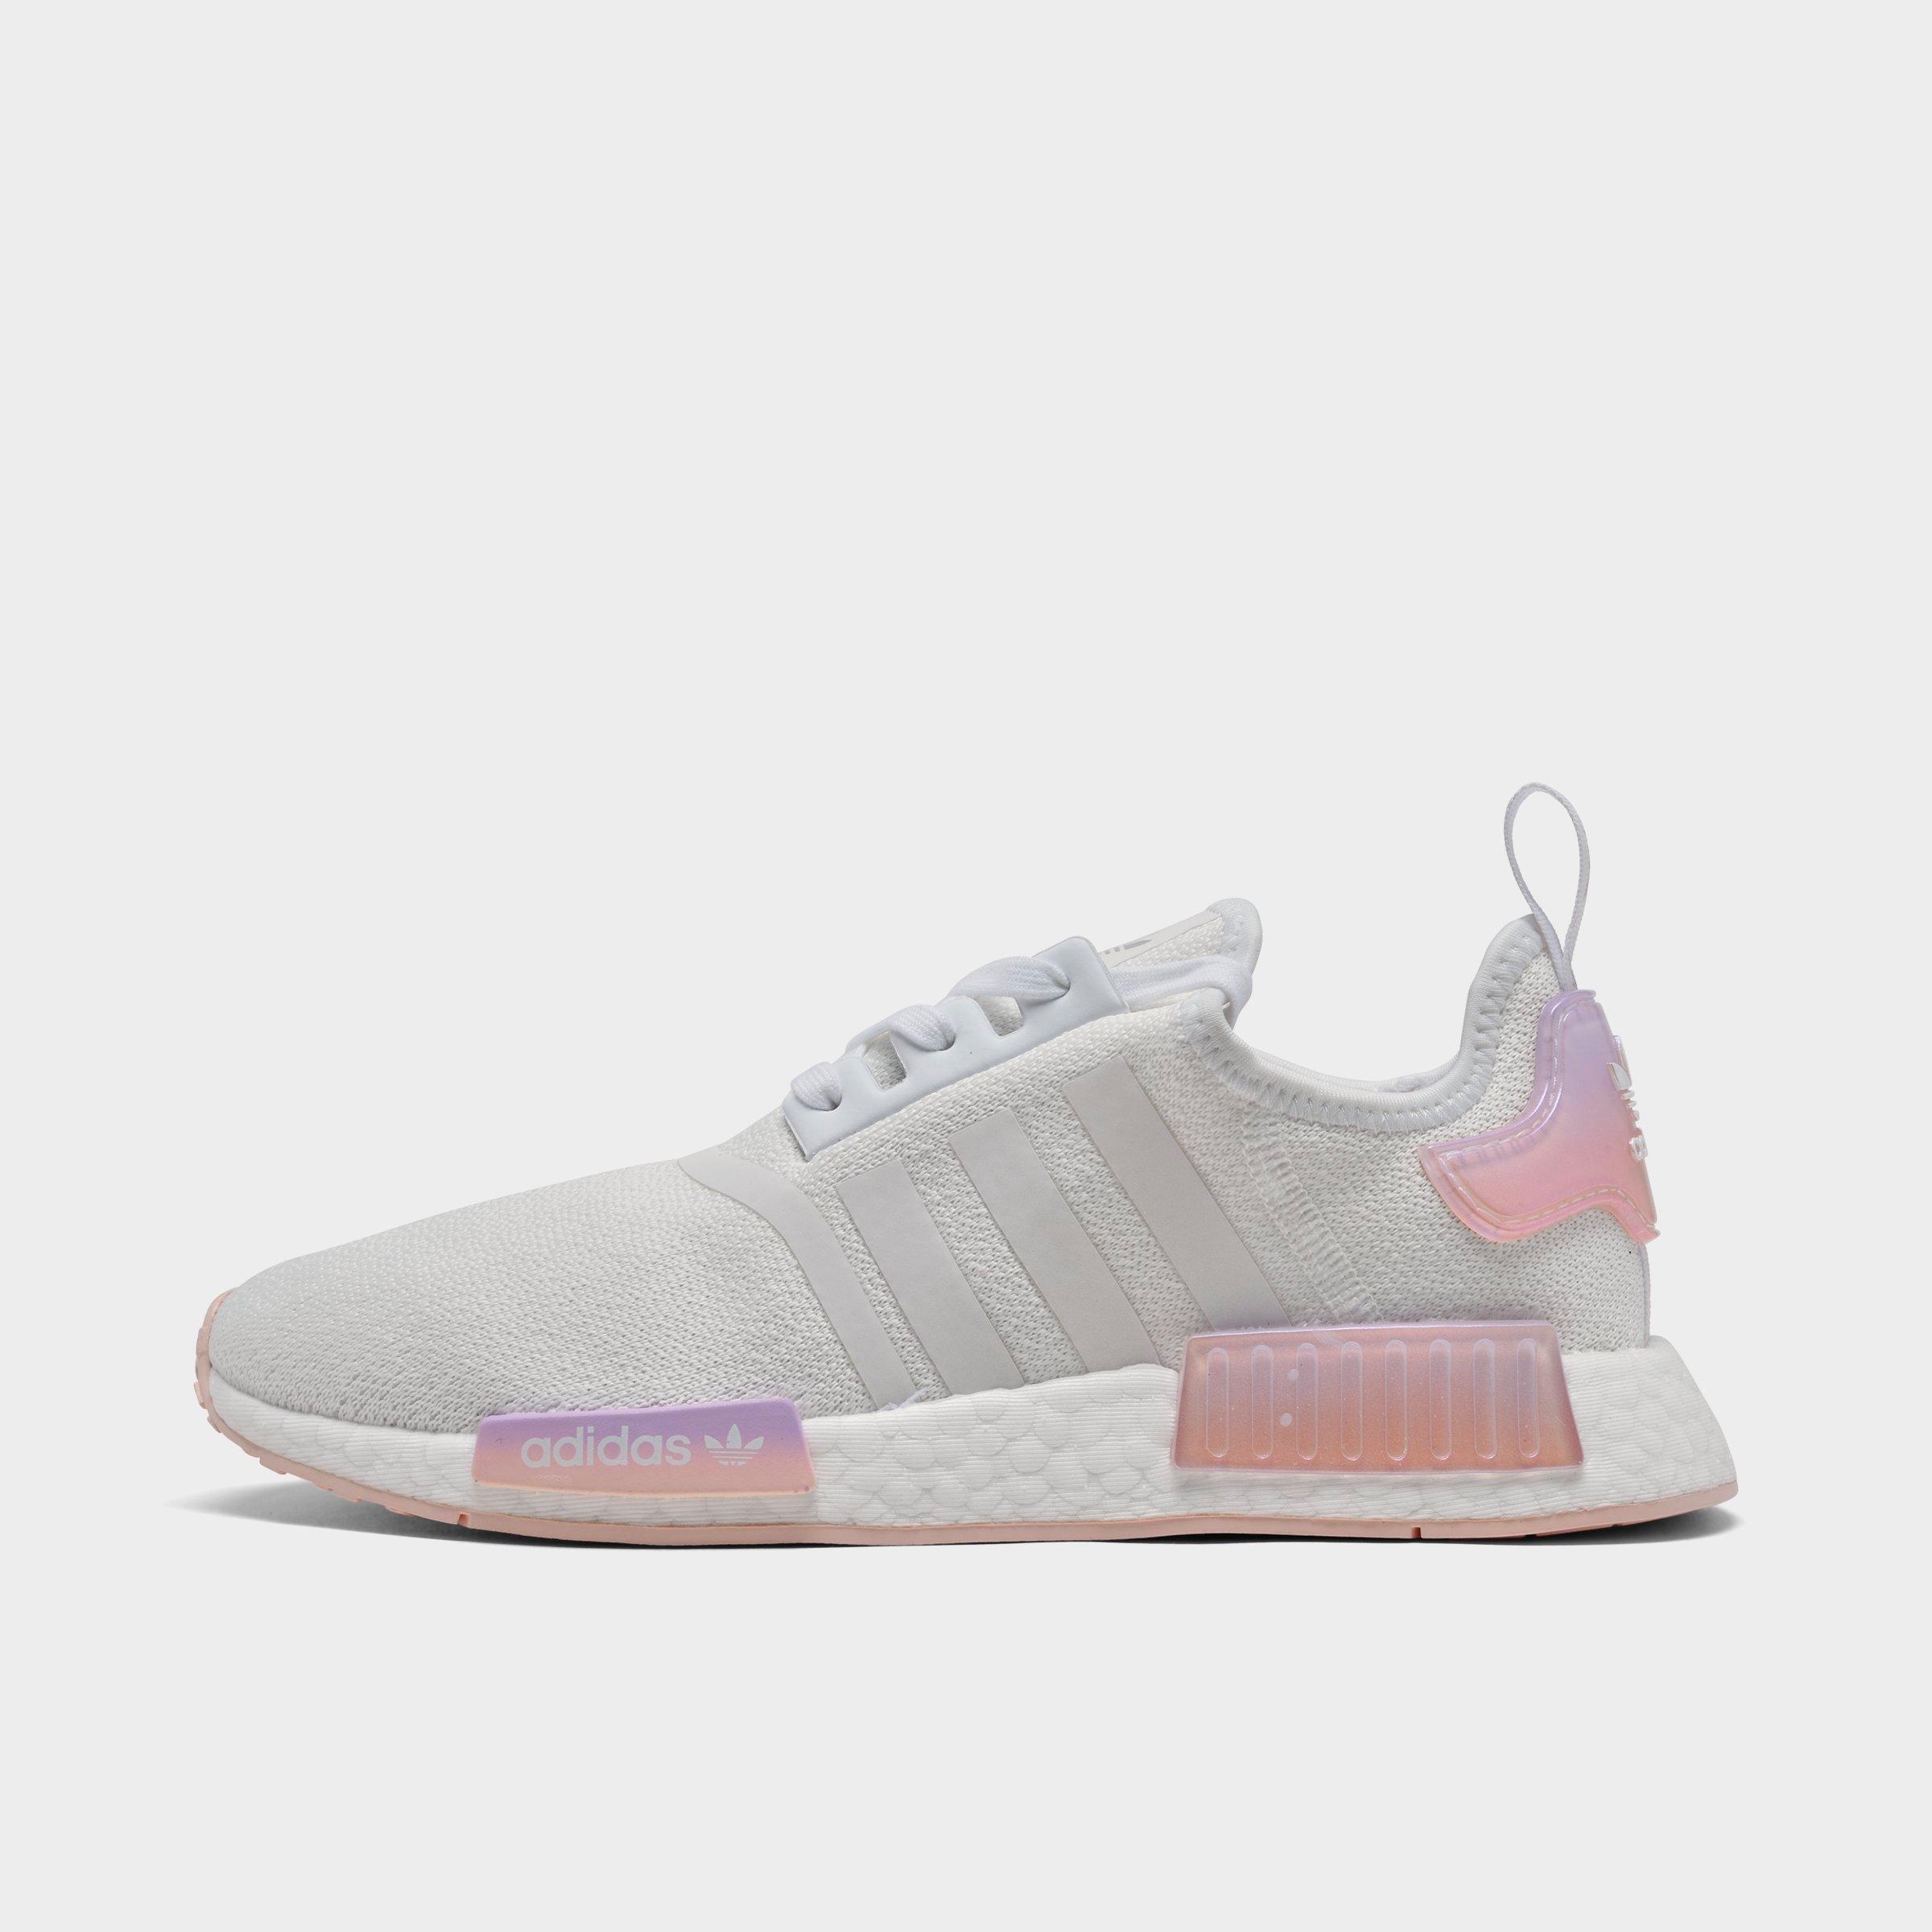 adidas nmd womens pink and white